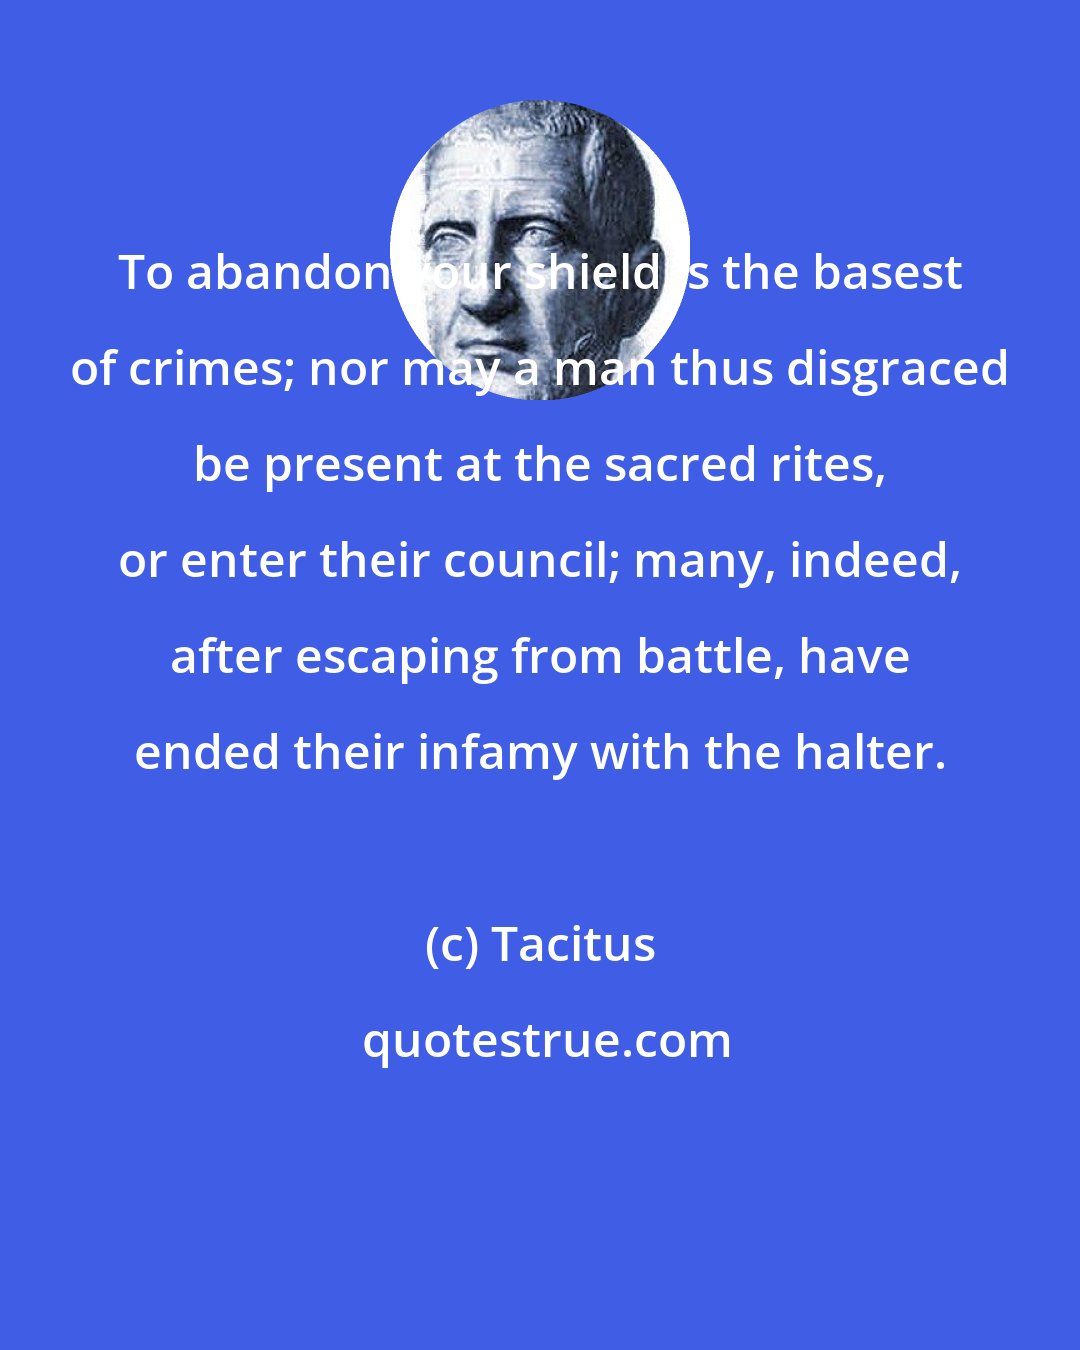 Tacitus: To abandon your shield is the basest of crimes; nor may a man thus disgraced be present at the sacred rites, or enter their council; many, indeed, after escaping from battle, have ended their infamy with the halter.